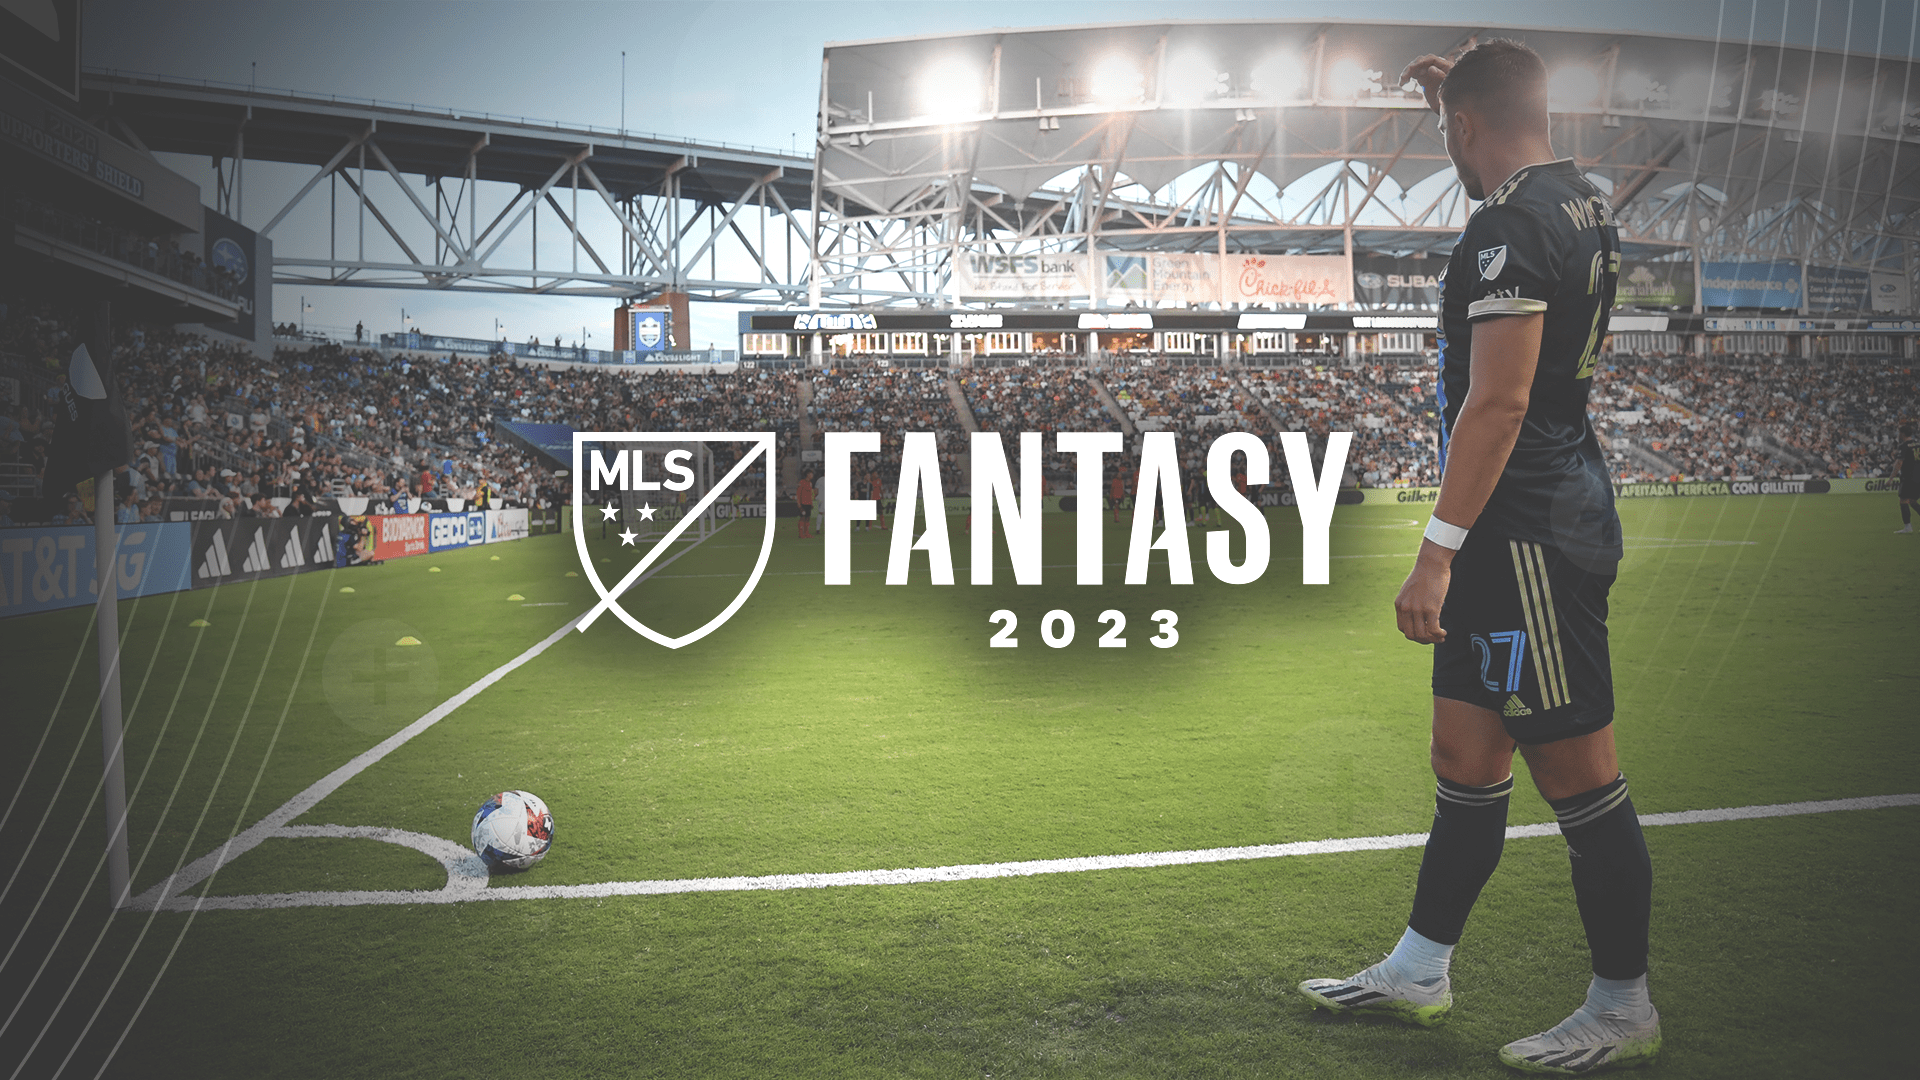 MLS Fantasy Week 27 positional rankings and gaming advice